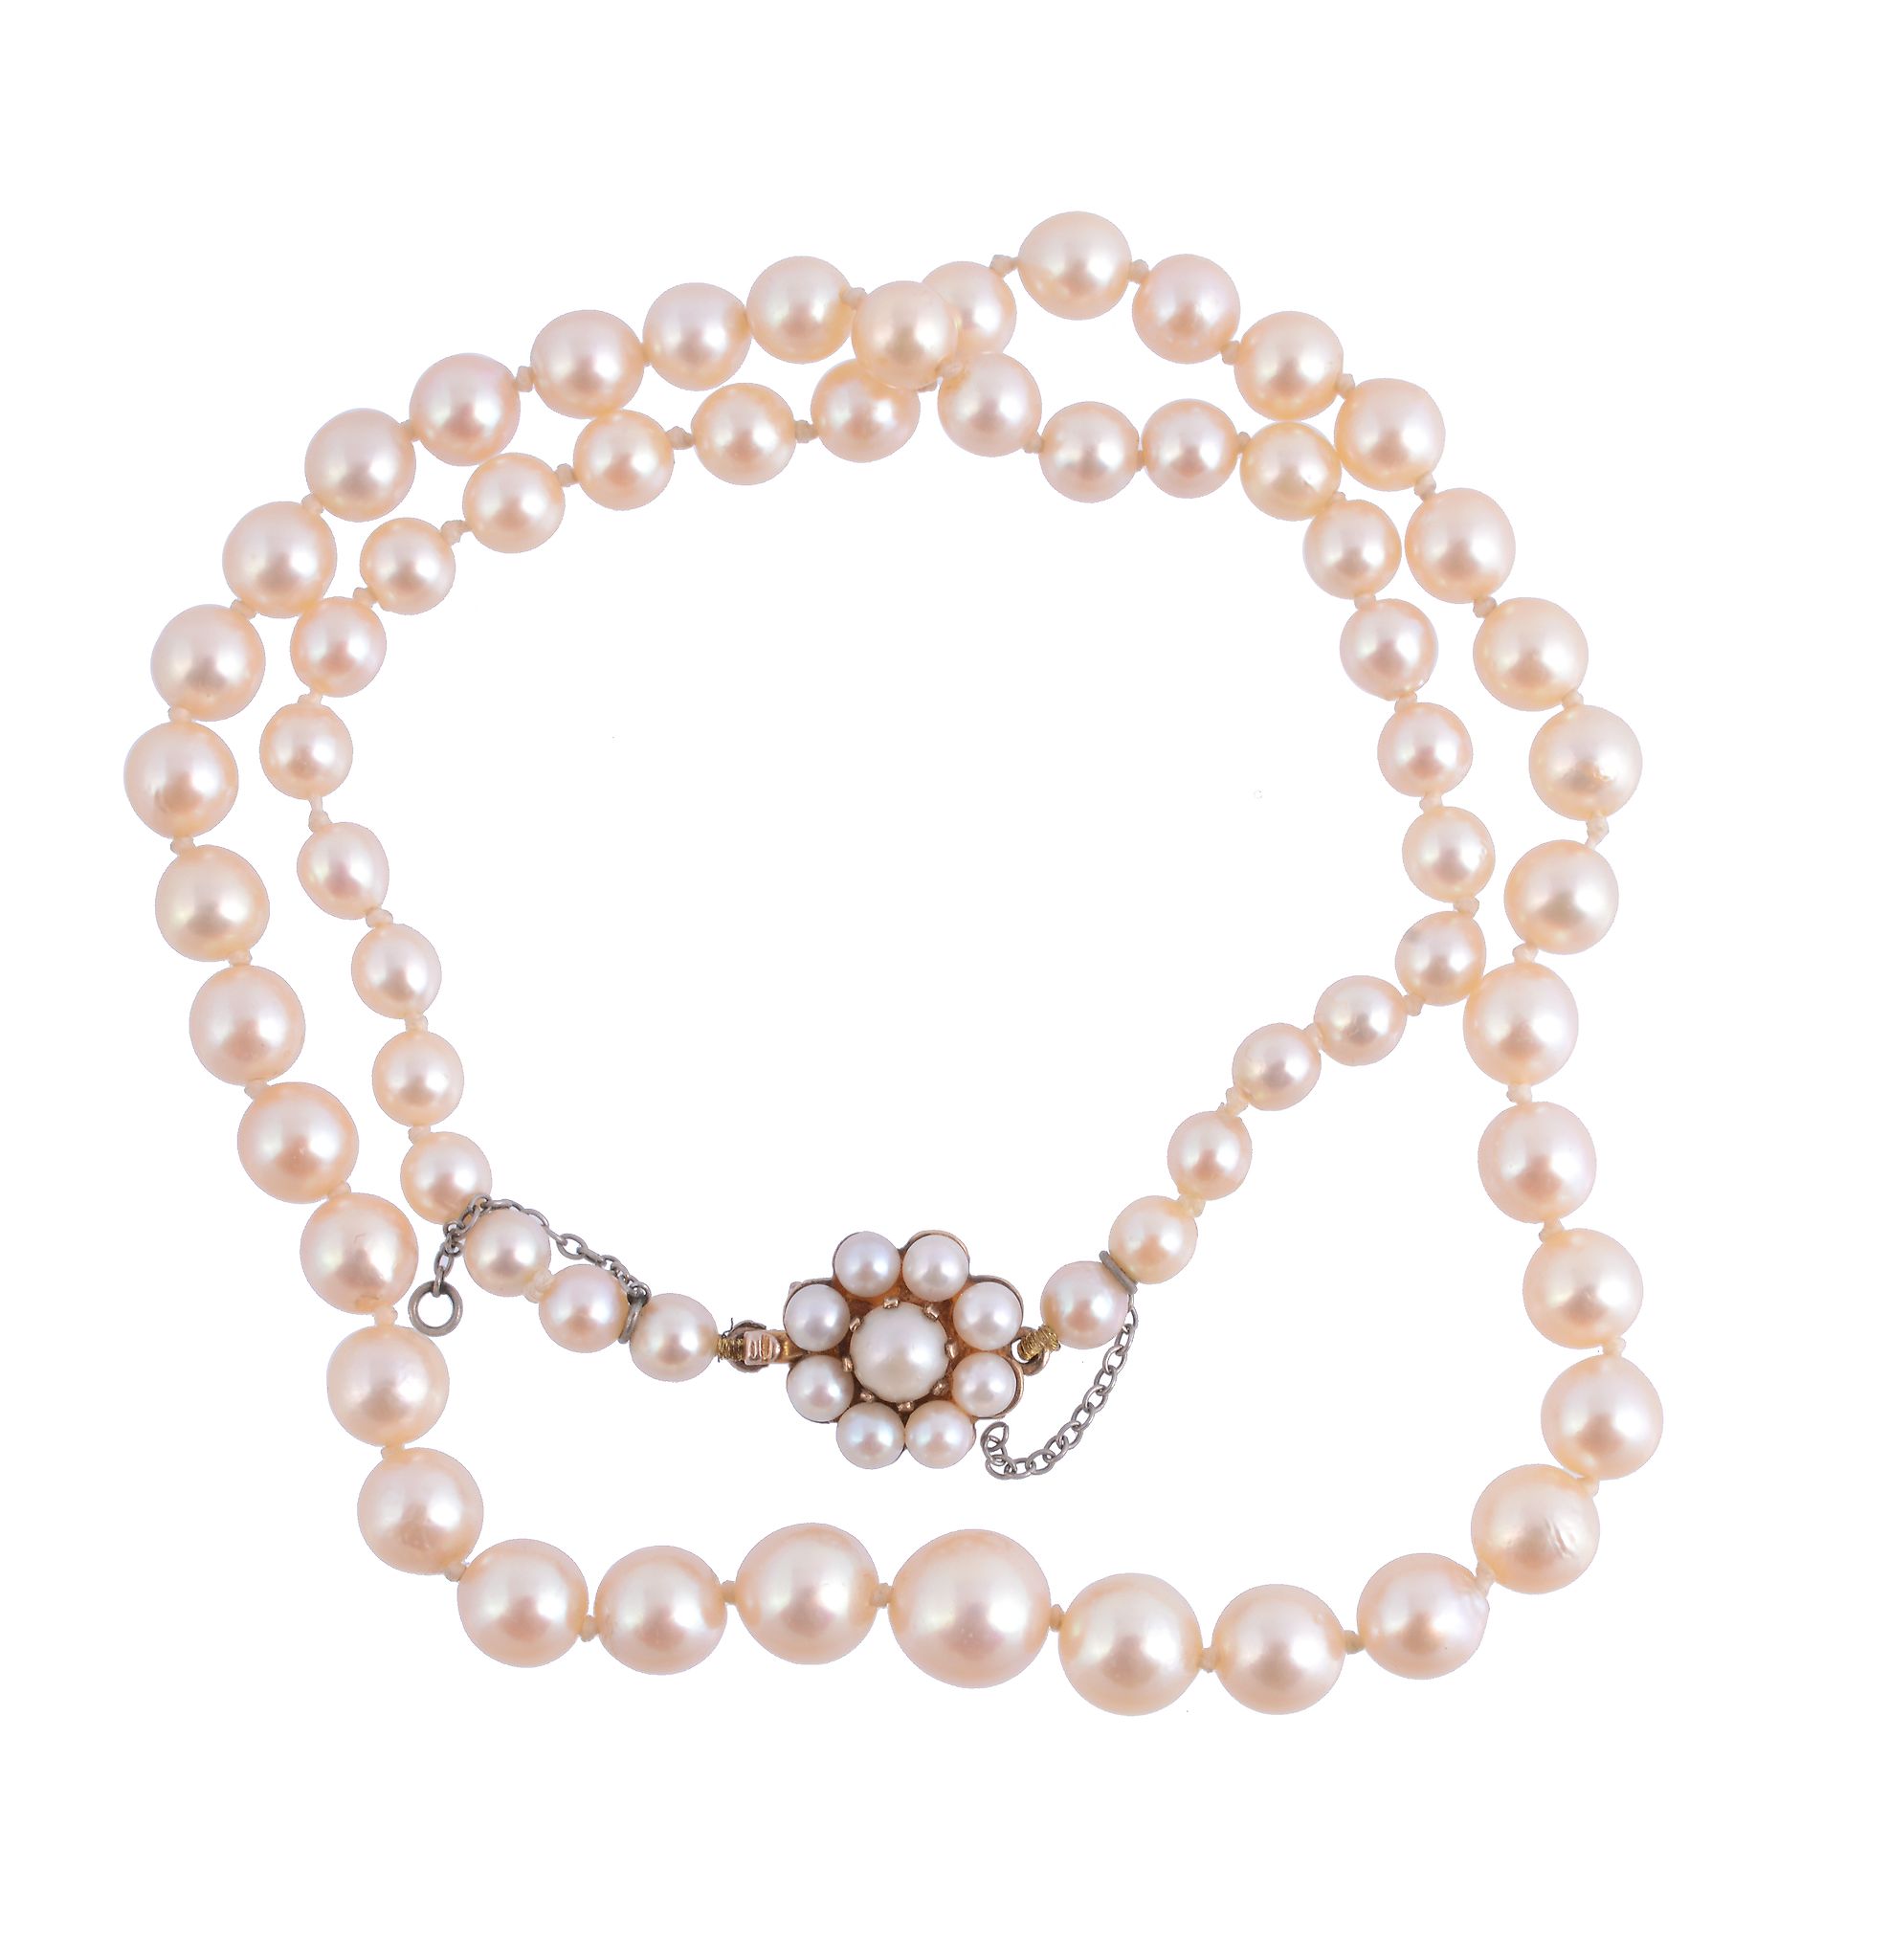 A cultured pearl necklace,   the graduated cultured pearls measuring 4mm to 8mm, with a 9 carat